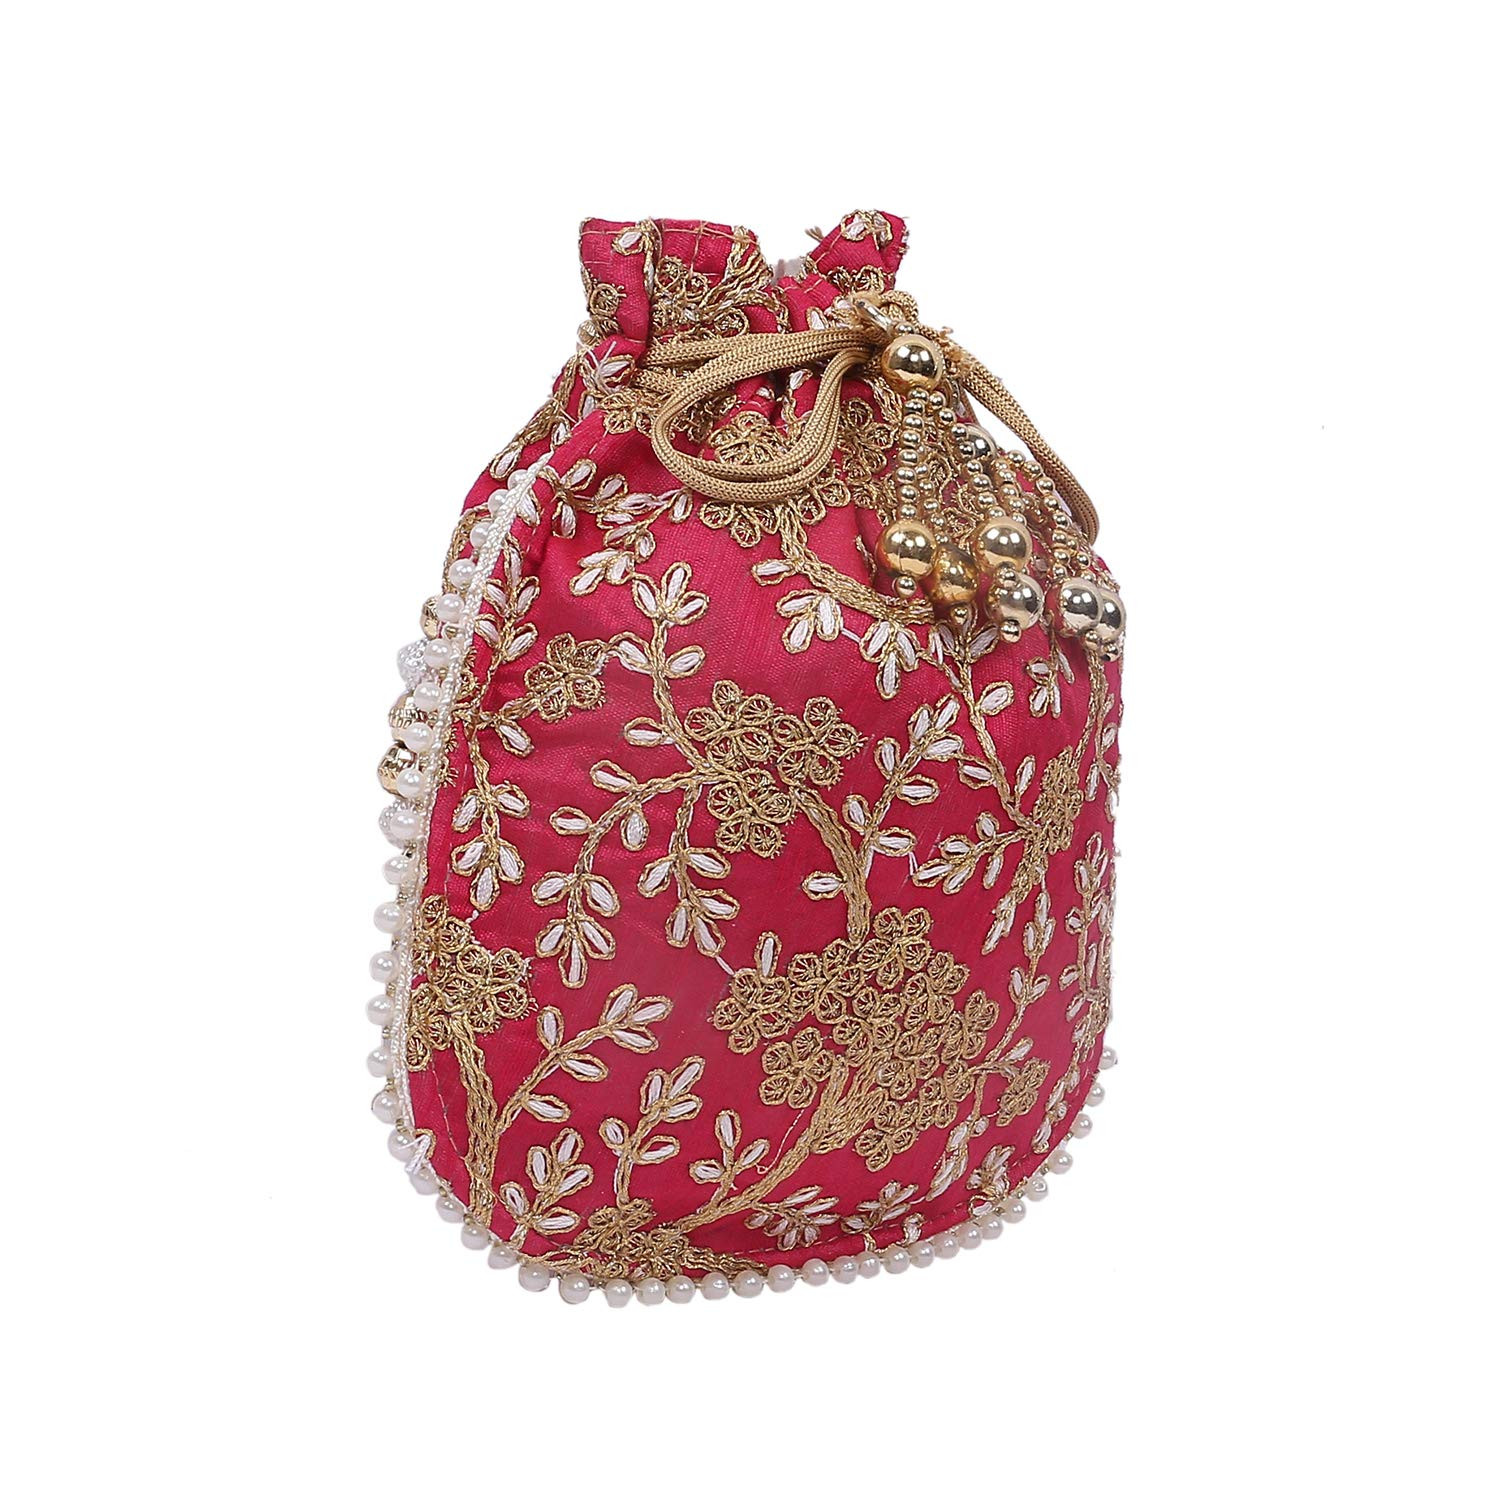 Kuber Industries Embroidery Drawstring Potli|Hand Purse With Gold Pearl Border & Handle For Woman,Girls Pack of 2 (Black & Red)